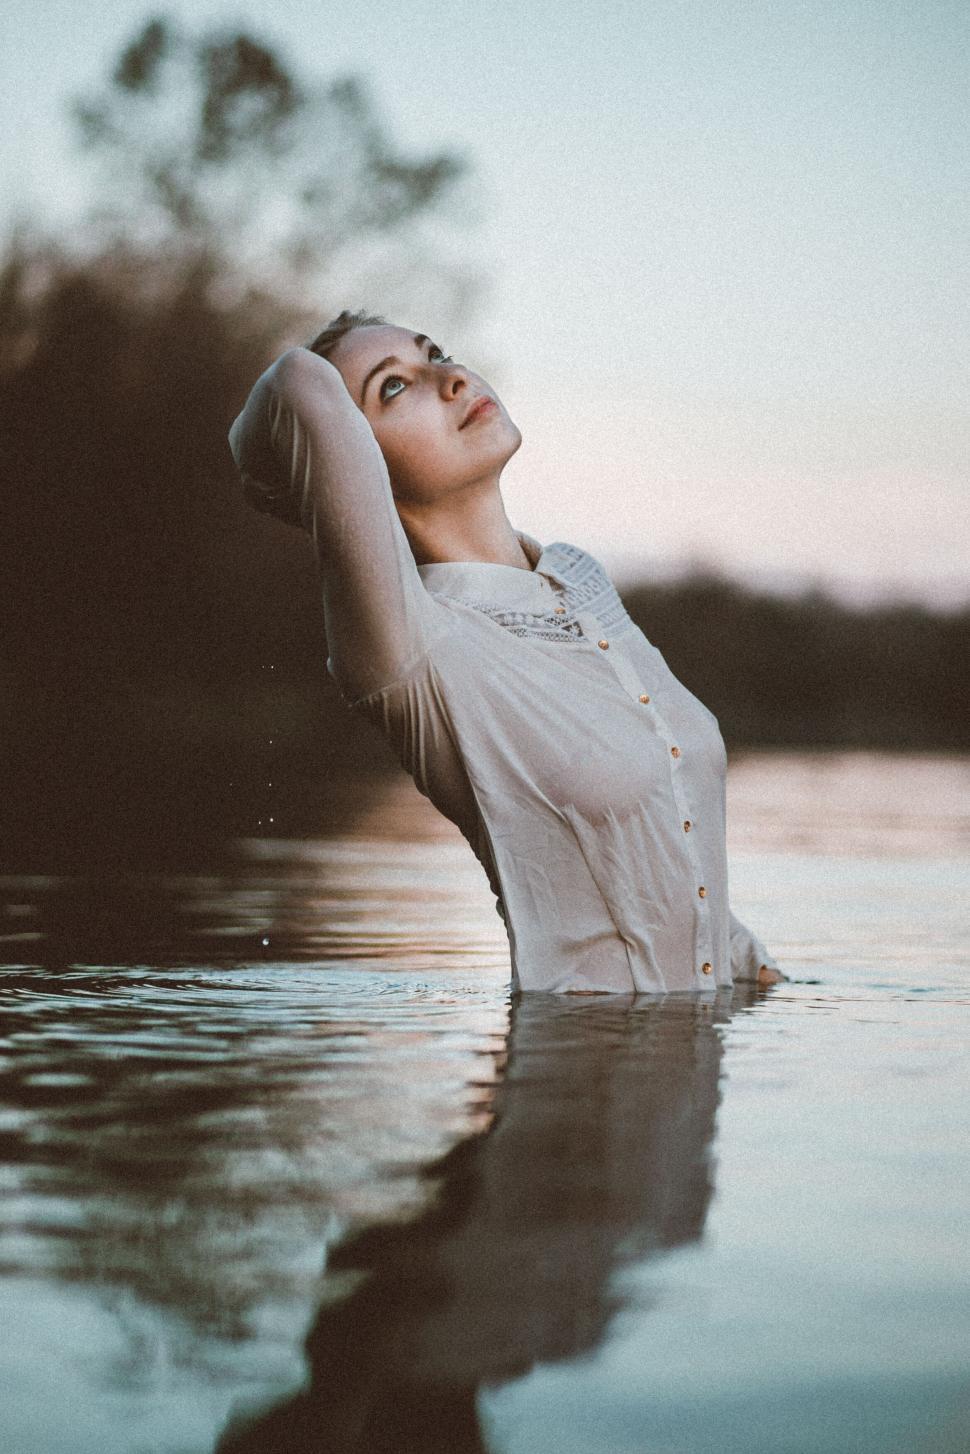 Free Image of A woman in a white shirt standing in water 